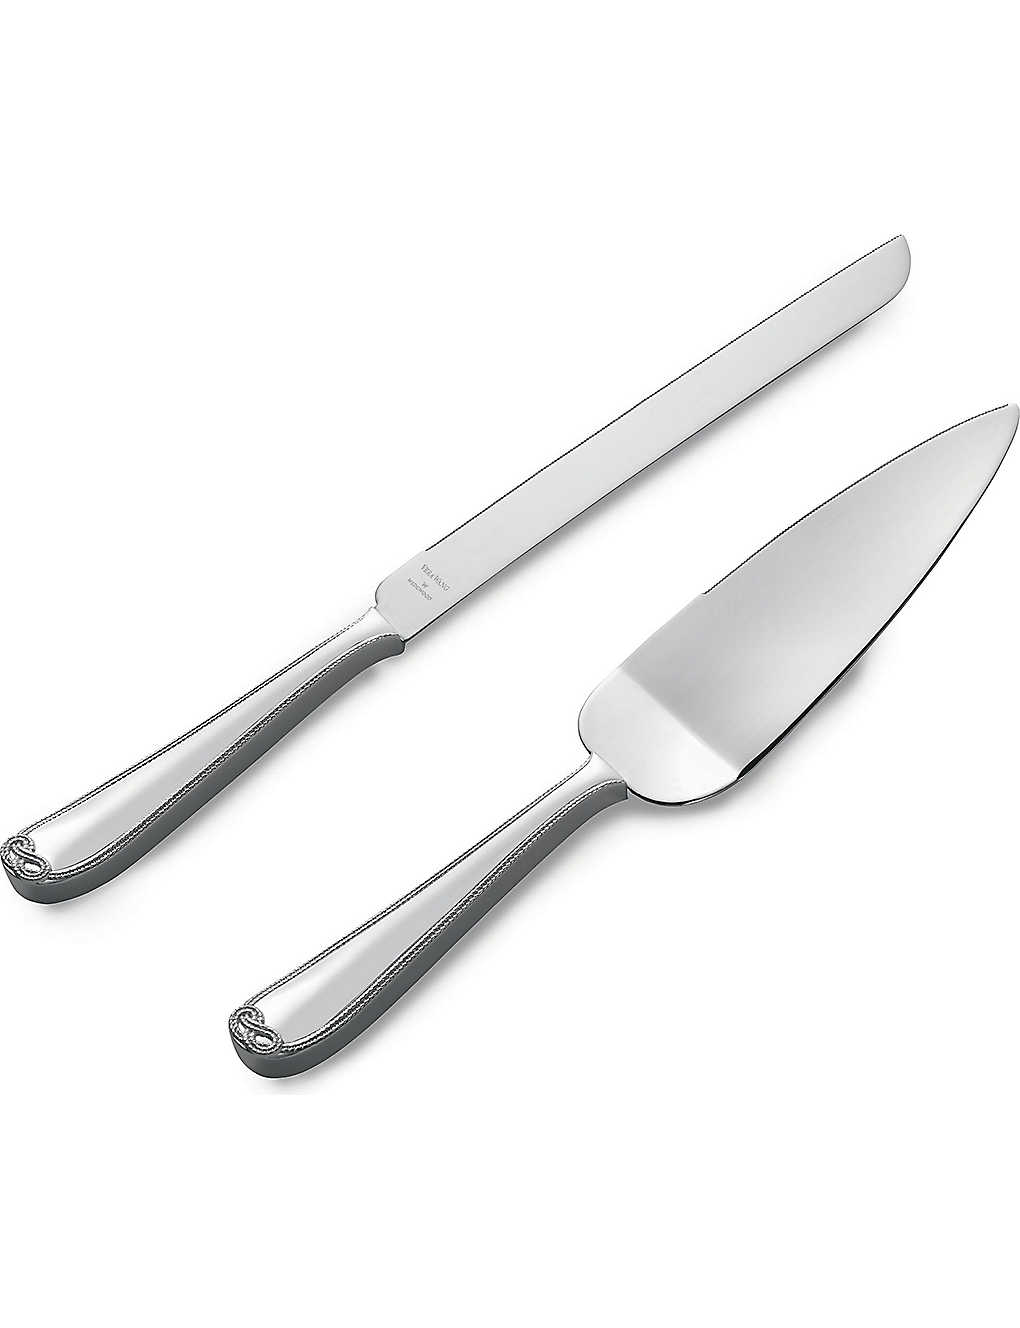 Vera Wang Wedgwood Vera Wang @ Wedgwood Wedgwood X Vera Wang Silver-plated Stainless-steel Cake Knife And Server Set